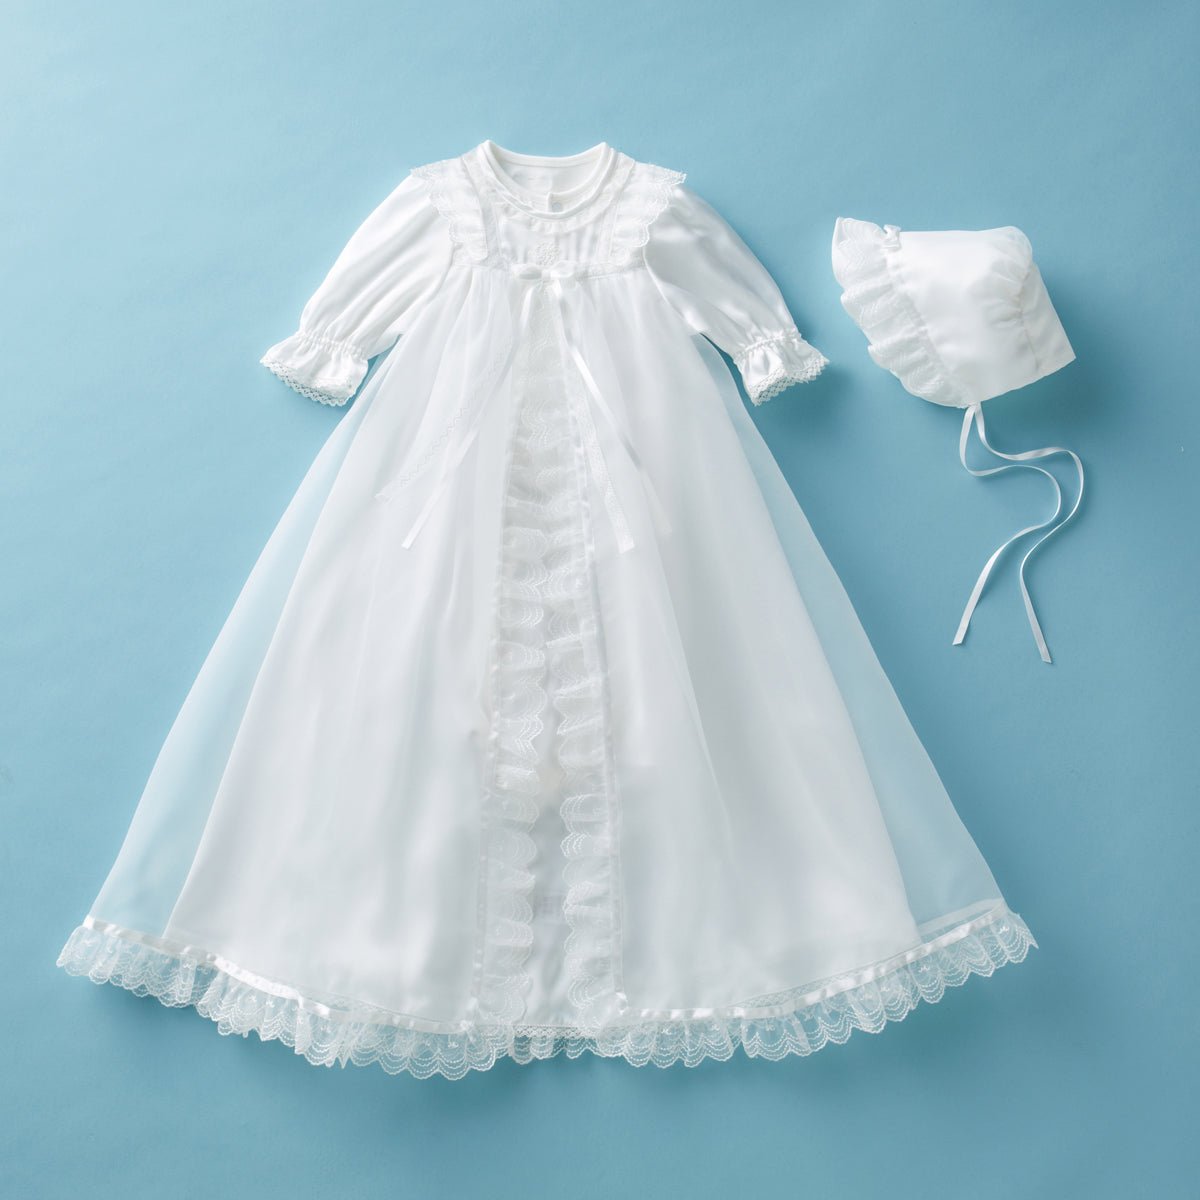 LITTLE KINGDOM GIRLS GC 003 – Baptism Dress Gown Set for Baby Girl in  Ernakulam at best price by Navin Creations - Justdial